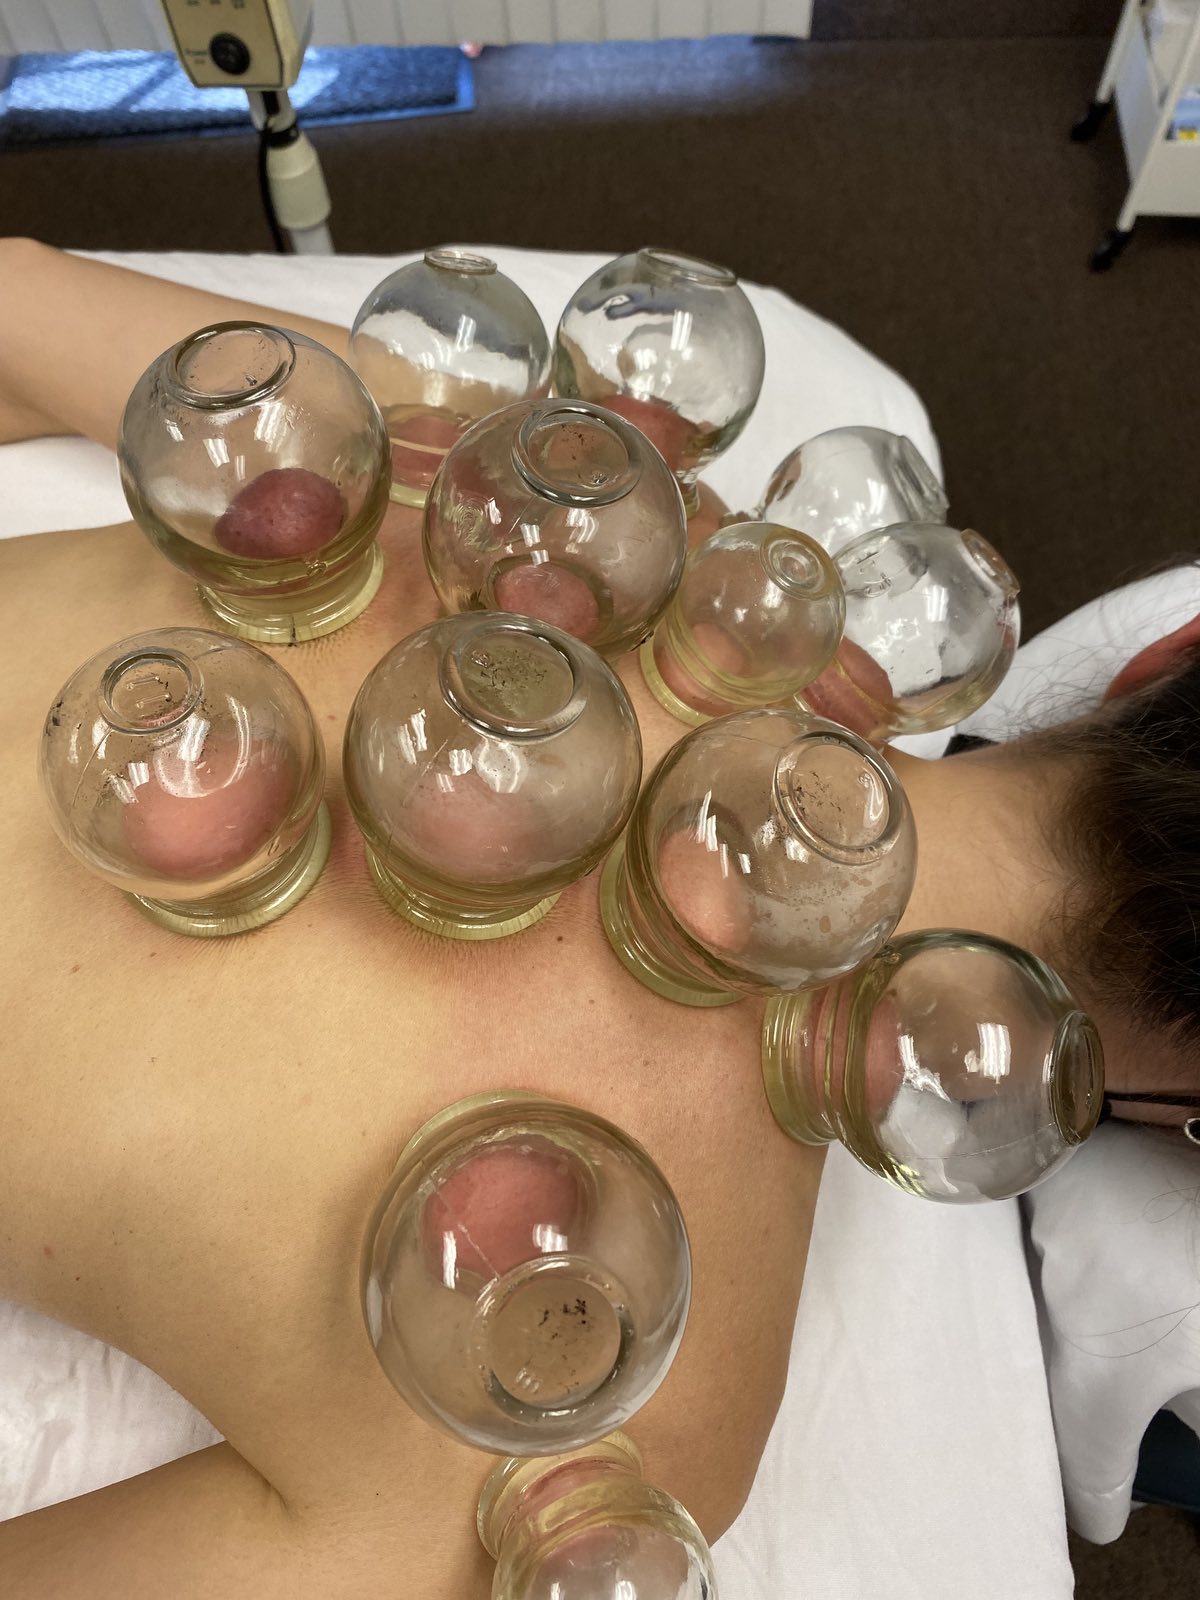 Cupping two